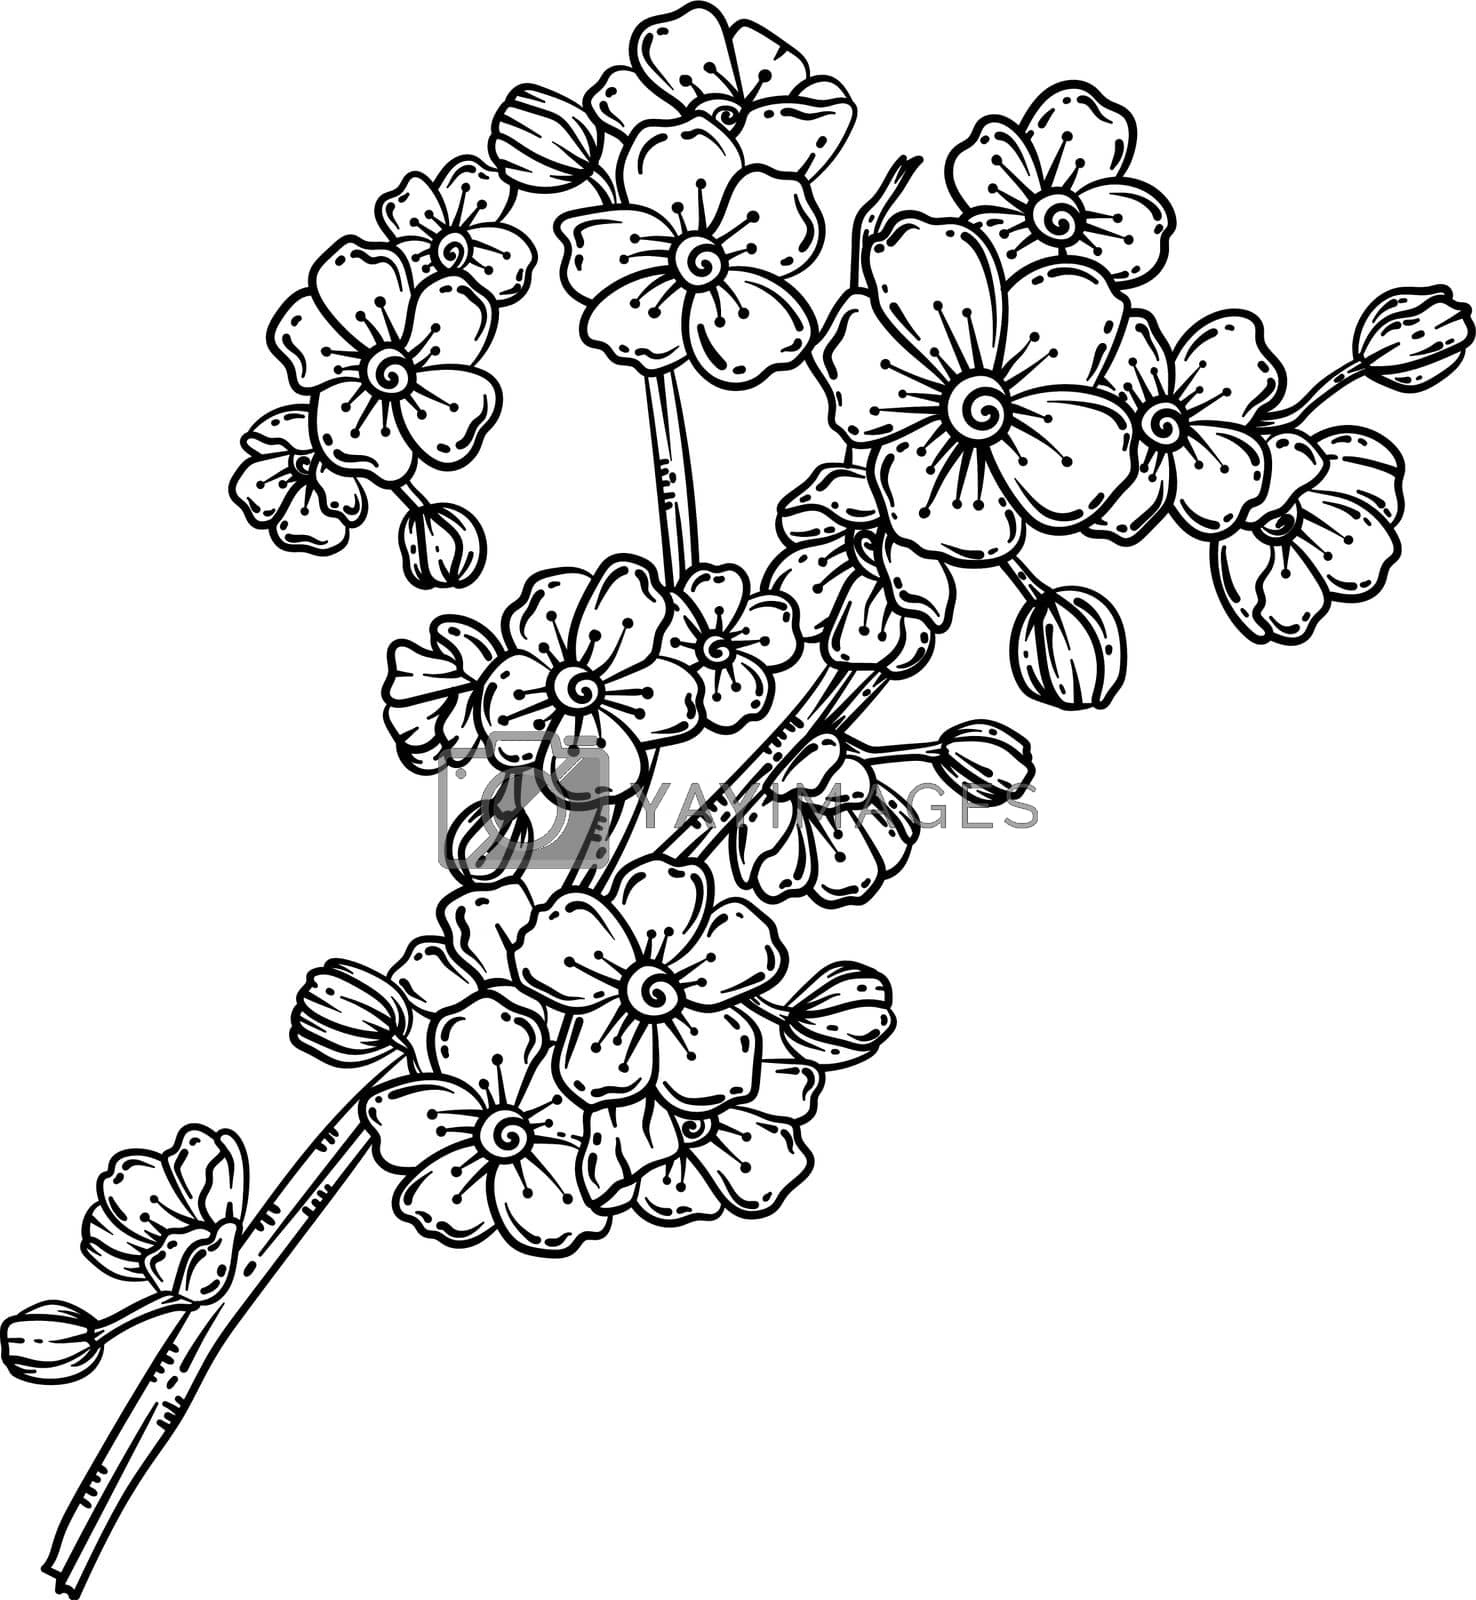 Royalty free image of Cherry Blossoms Spring Coloring Page for Adults by abbydesign